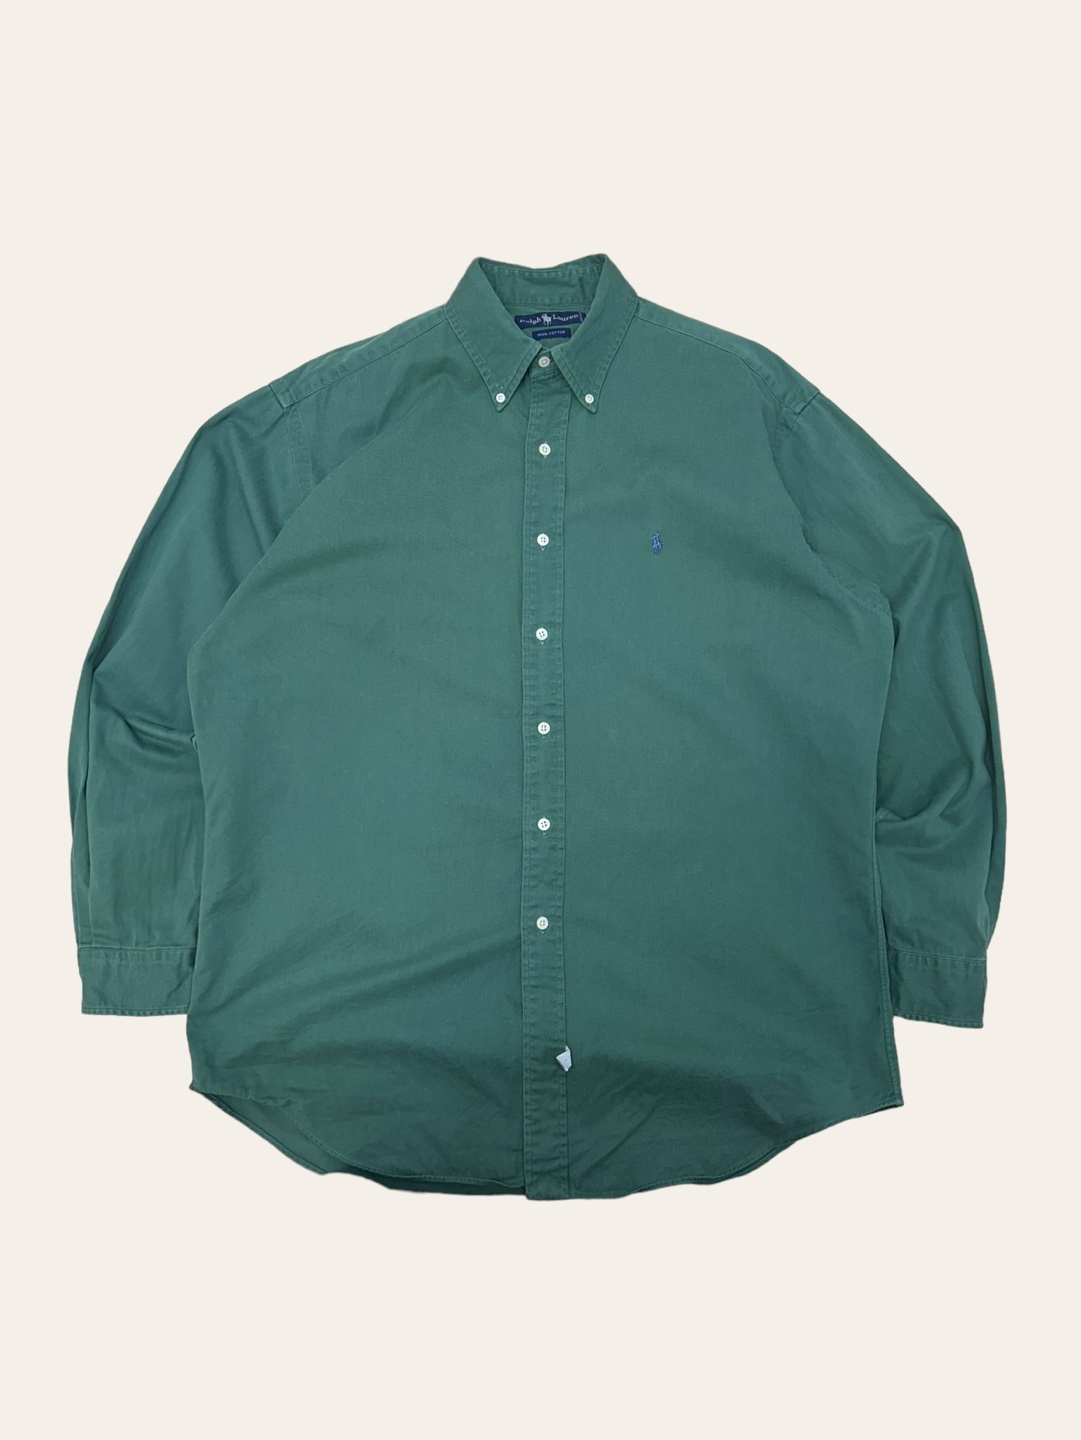 (From USA)Polo ralph lauren green color solid shirt 105